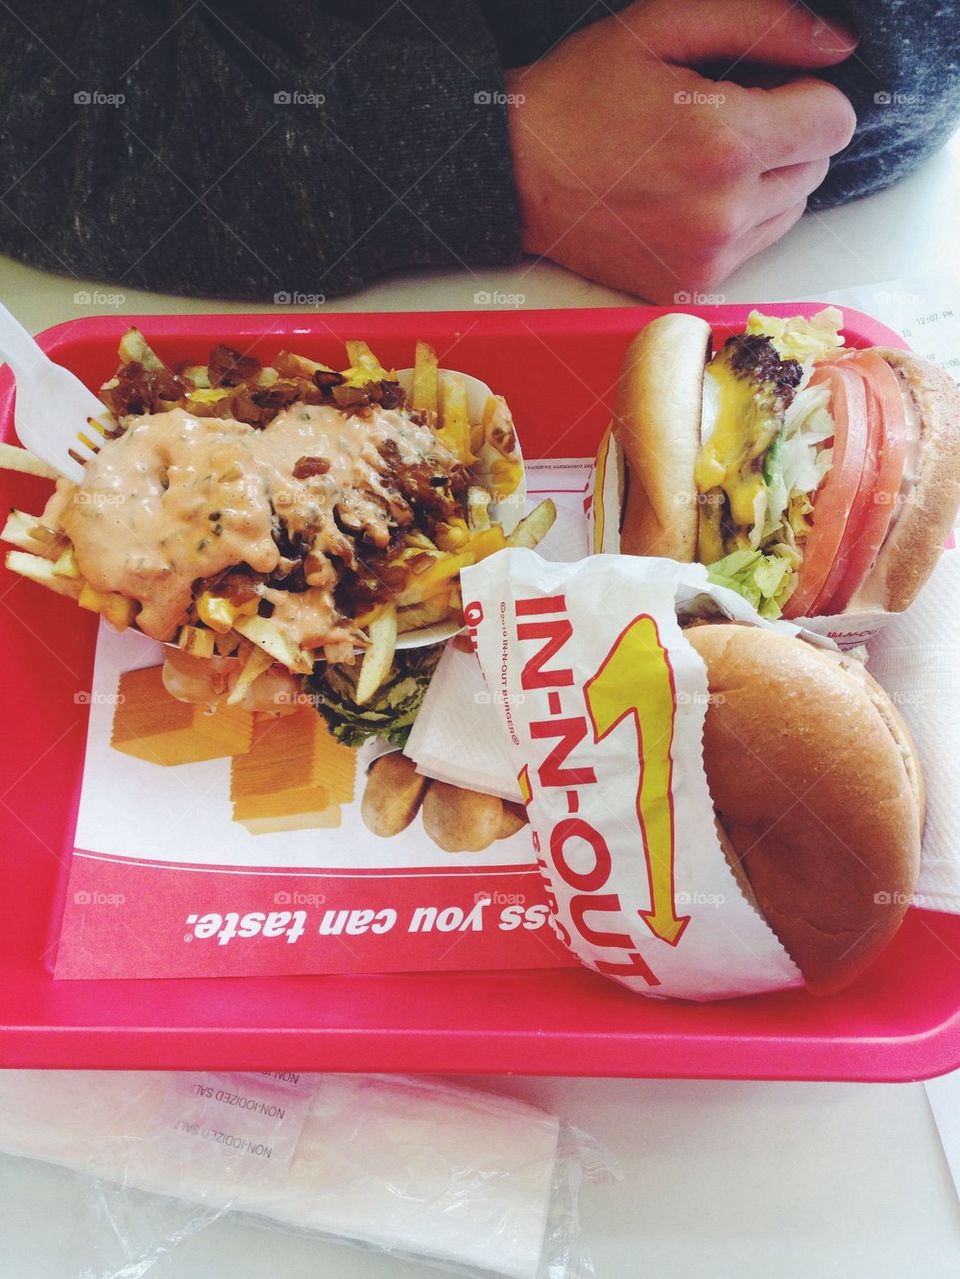 In - n - out 